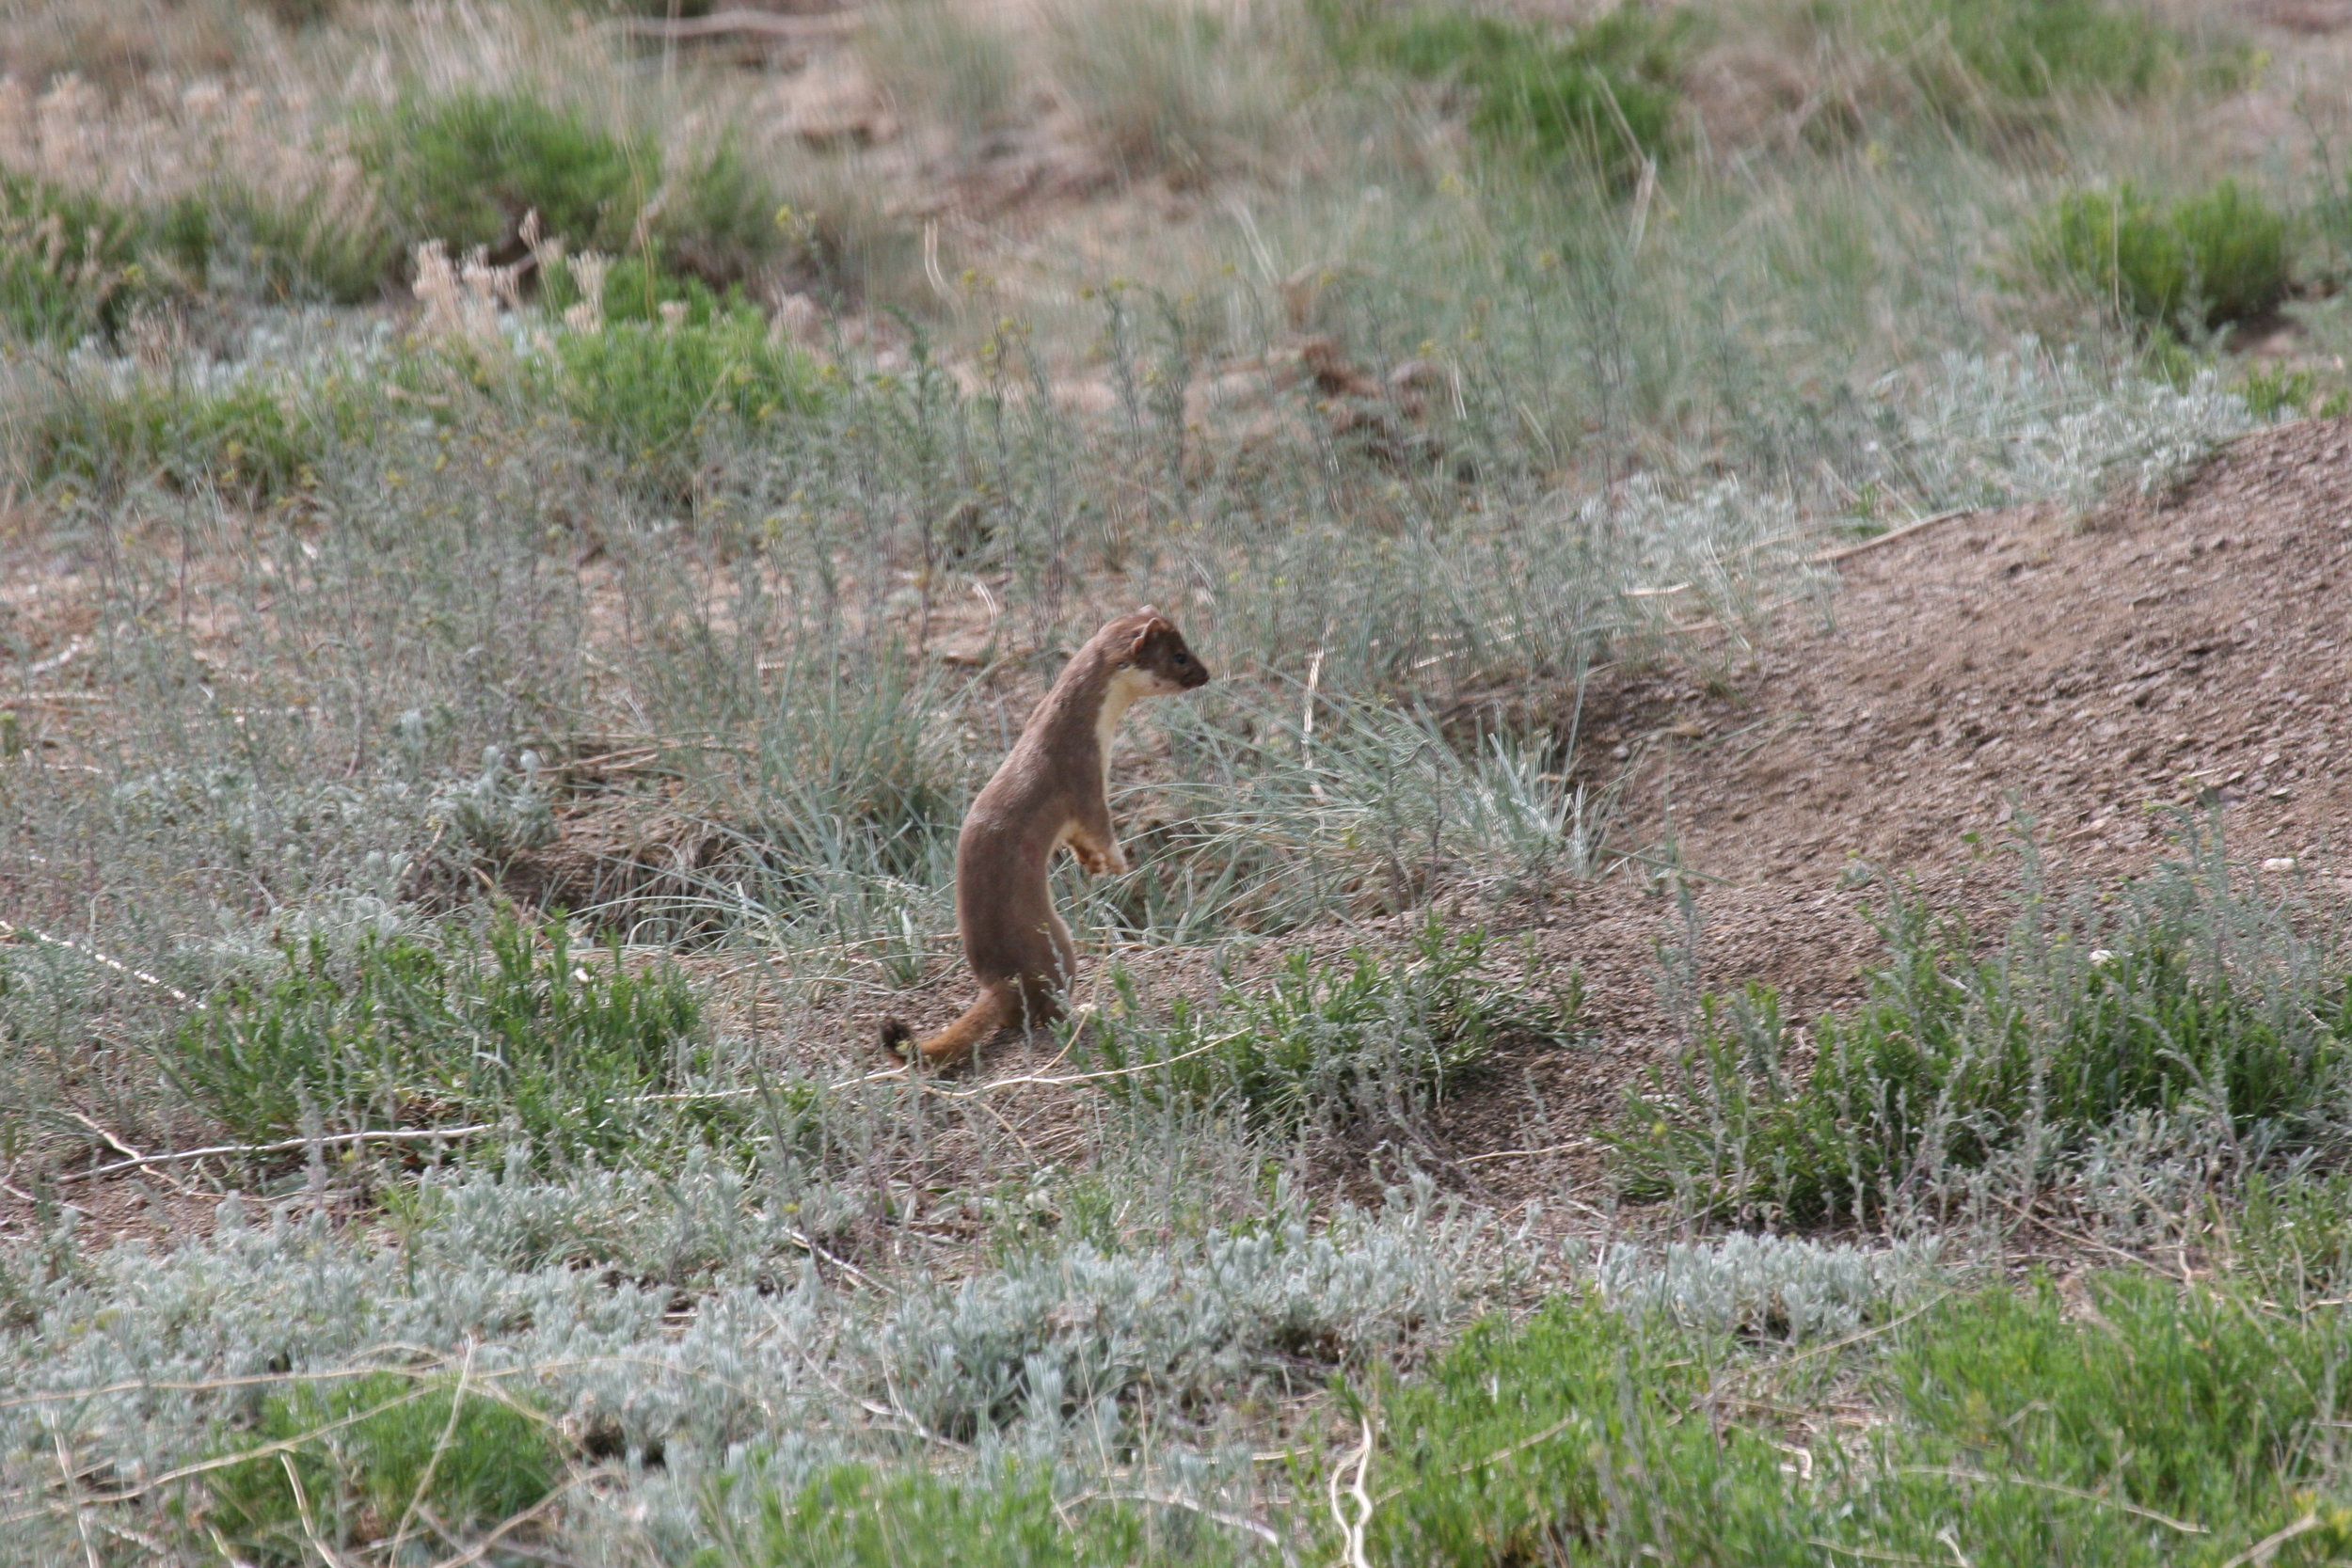  A long-tailed weasel can make quick and easy prey of juvenile prairie dogs.  ©John Hoogland 2006  